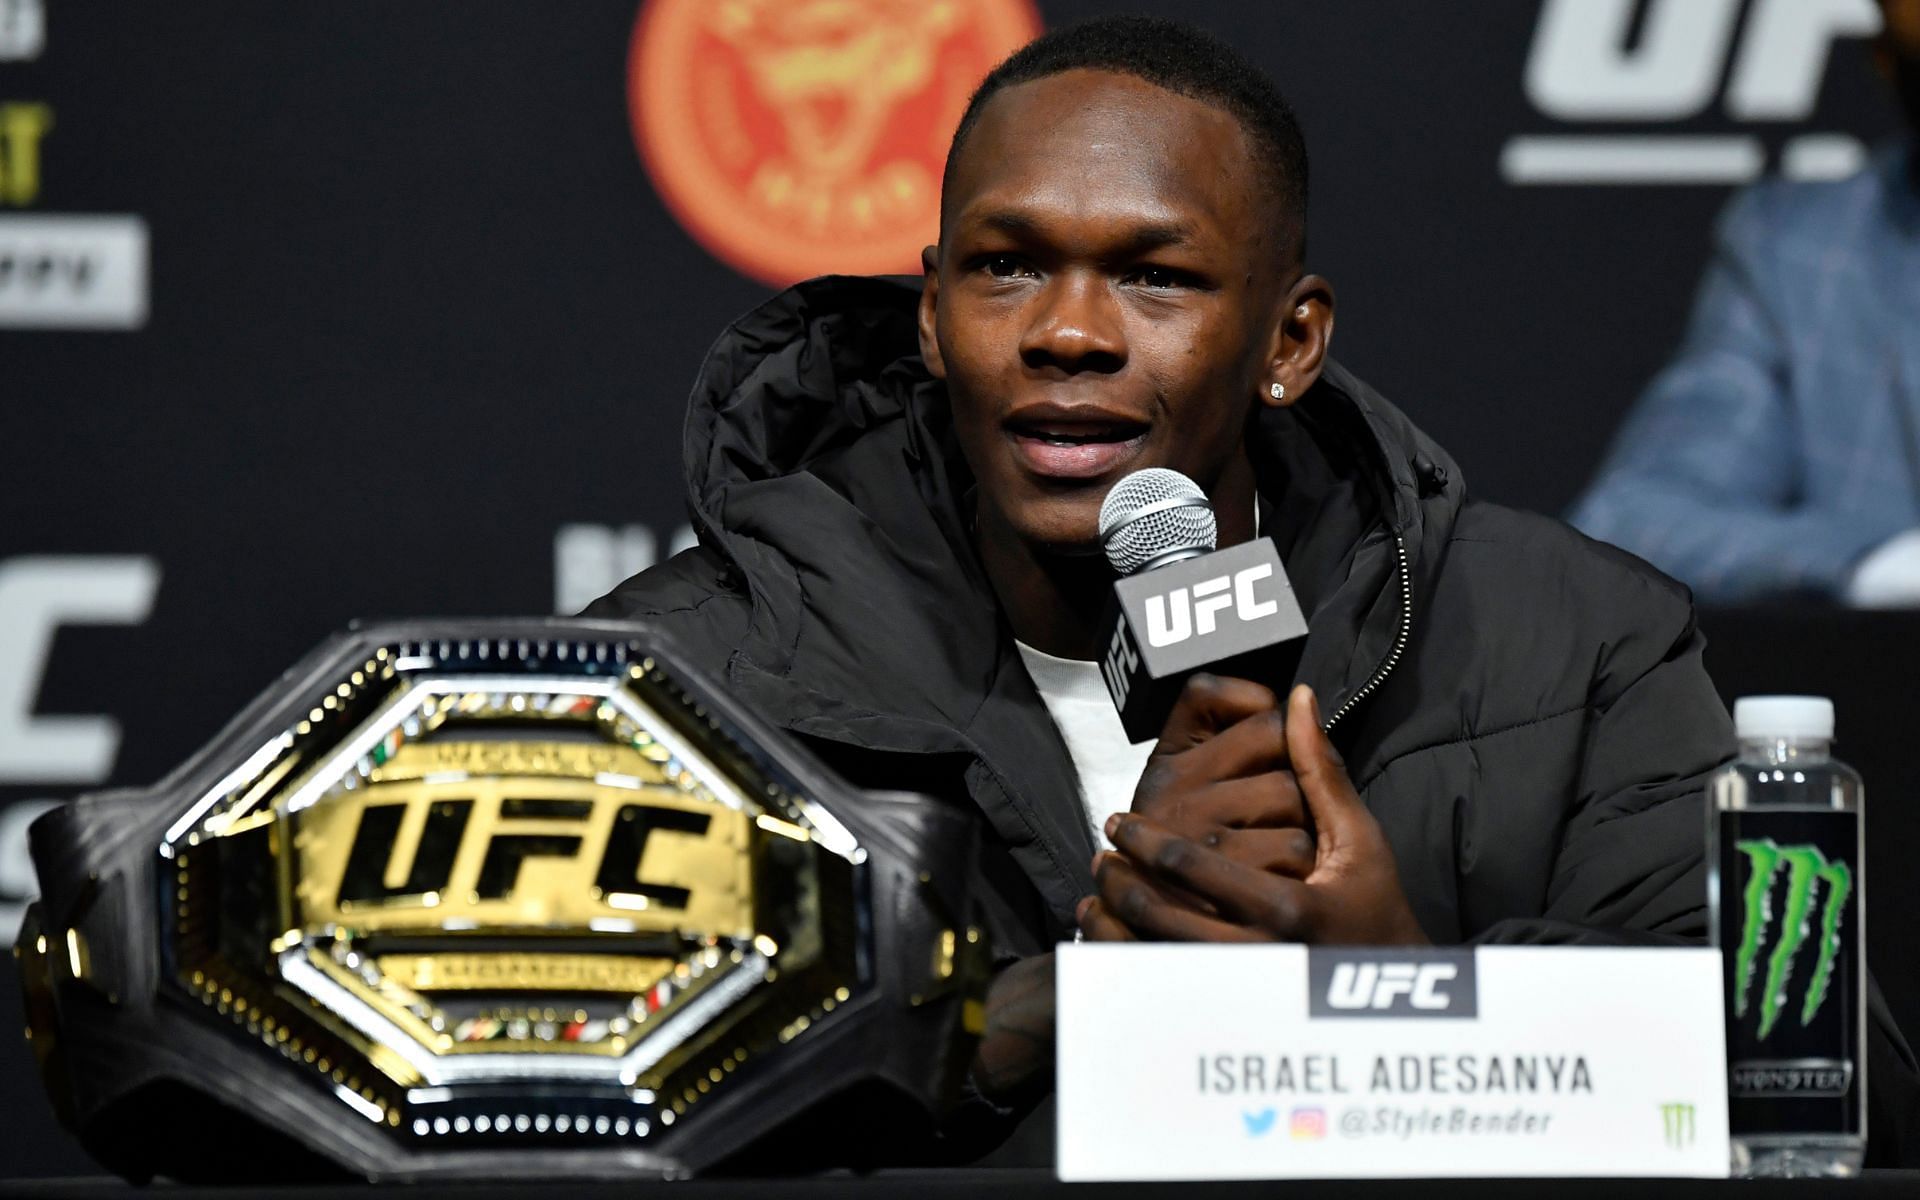 Israel Adesanya is heralded among the greatest fighters and talkers in MMA today